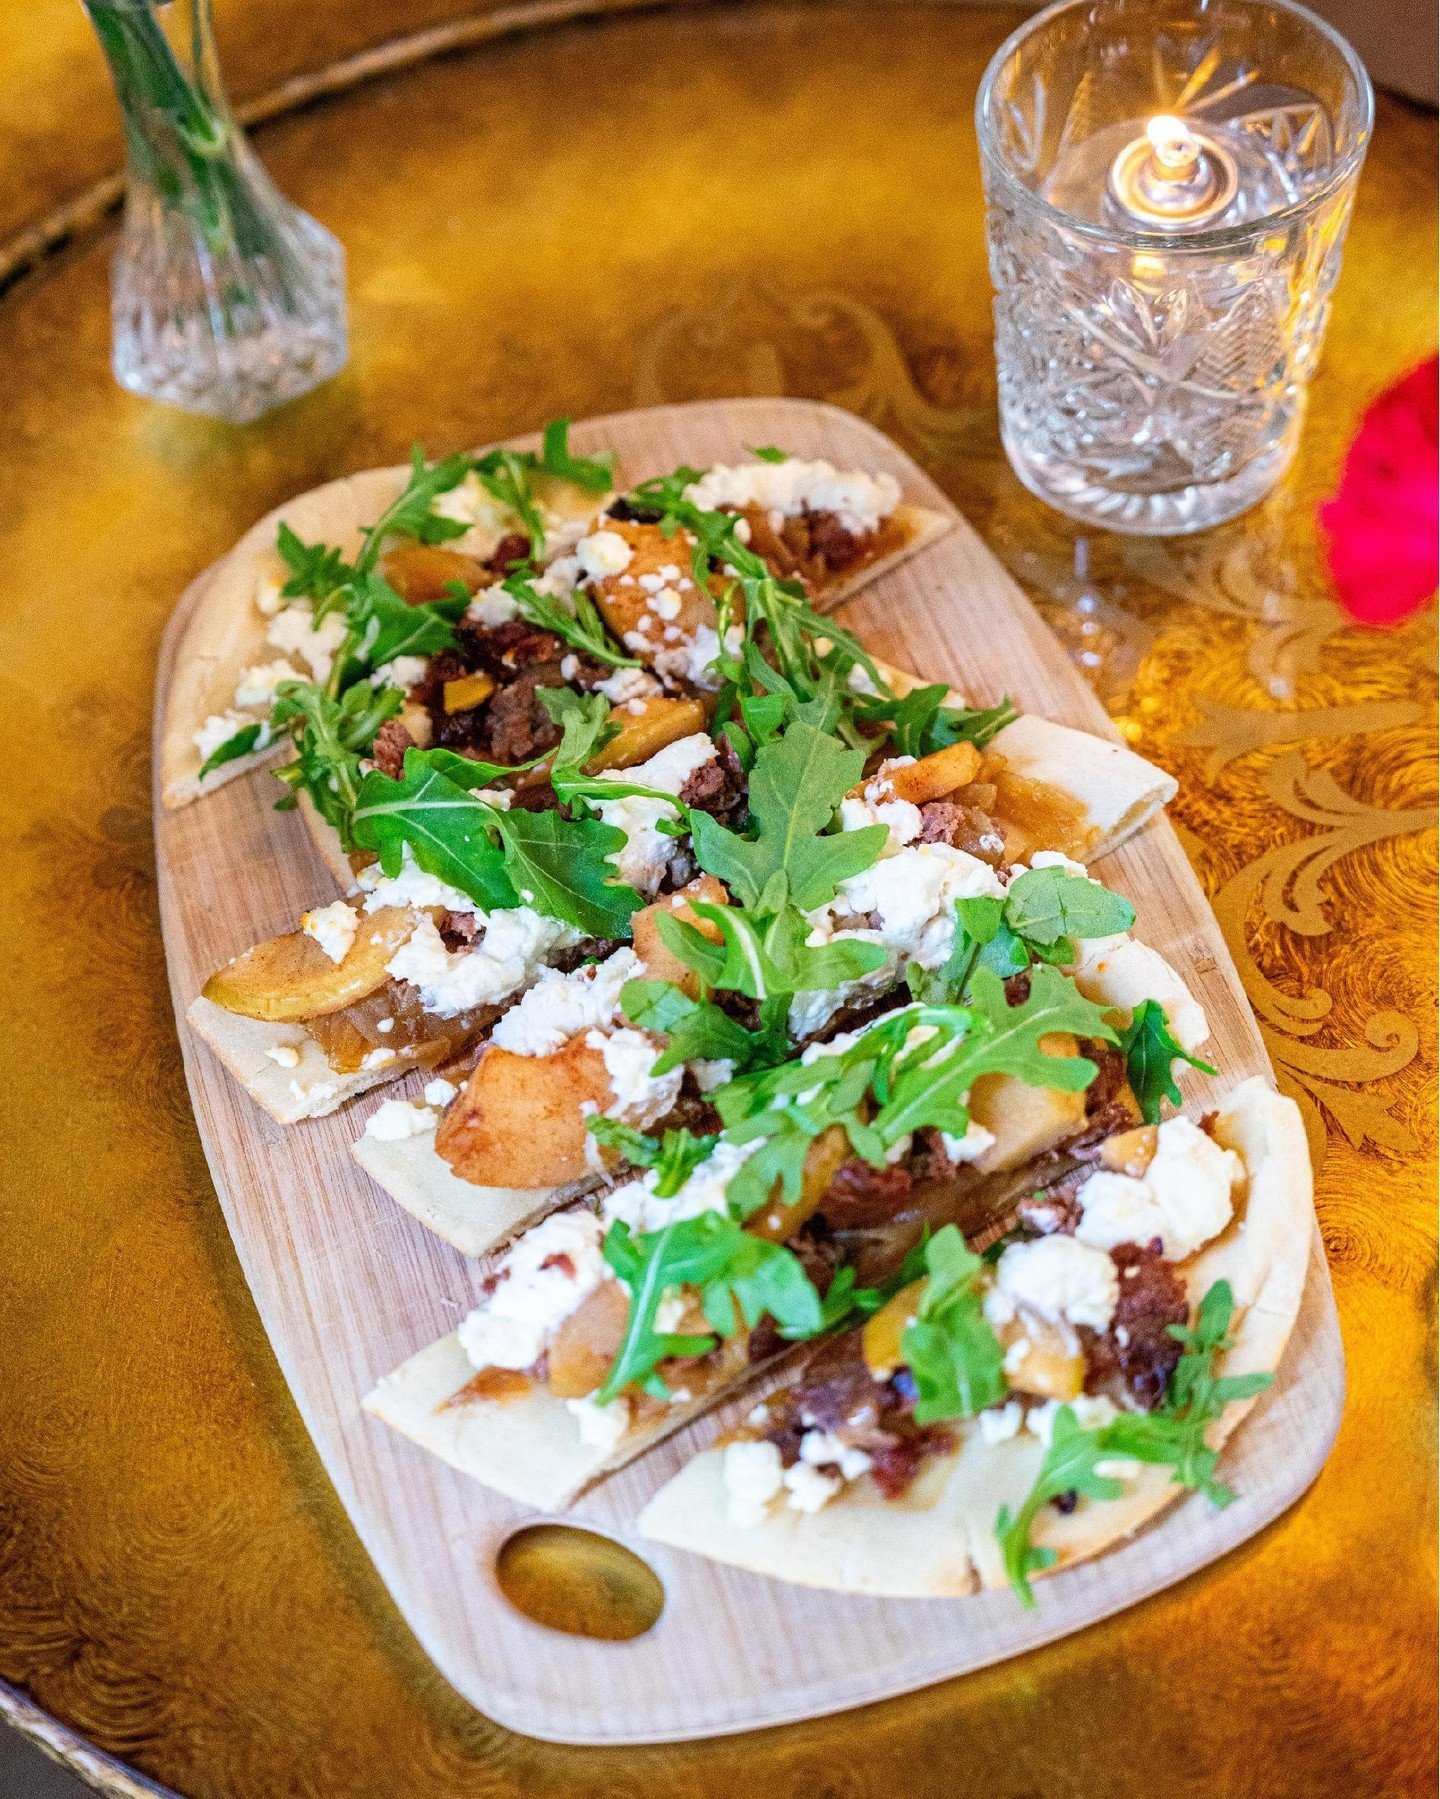 The perfect addition to your Sunday is ✨of course✨ a flatbread from Baileys' Chocolate Bar! 

Duck &amp; Apple Flatbread: duck sausage, caramelized onions
honey-roasted apples, and goat cheese

Open until 10pm!